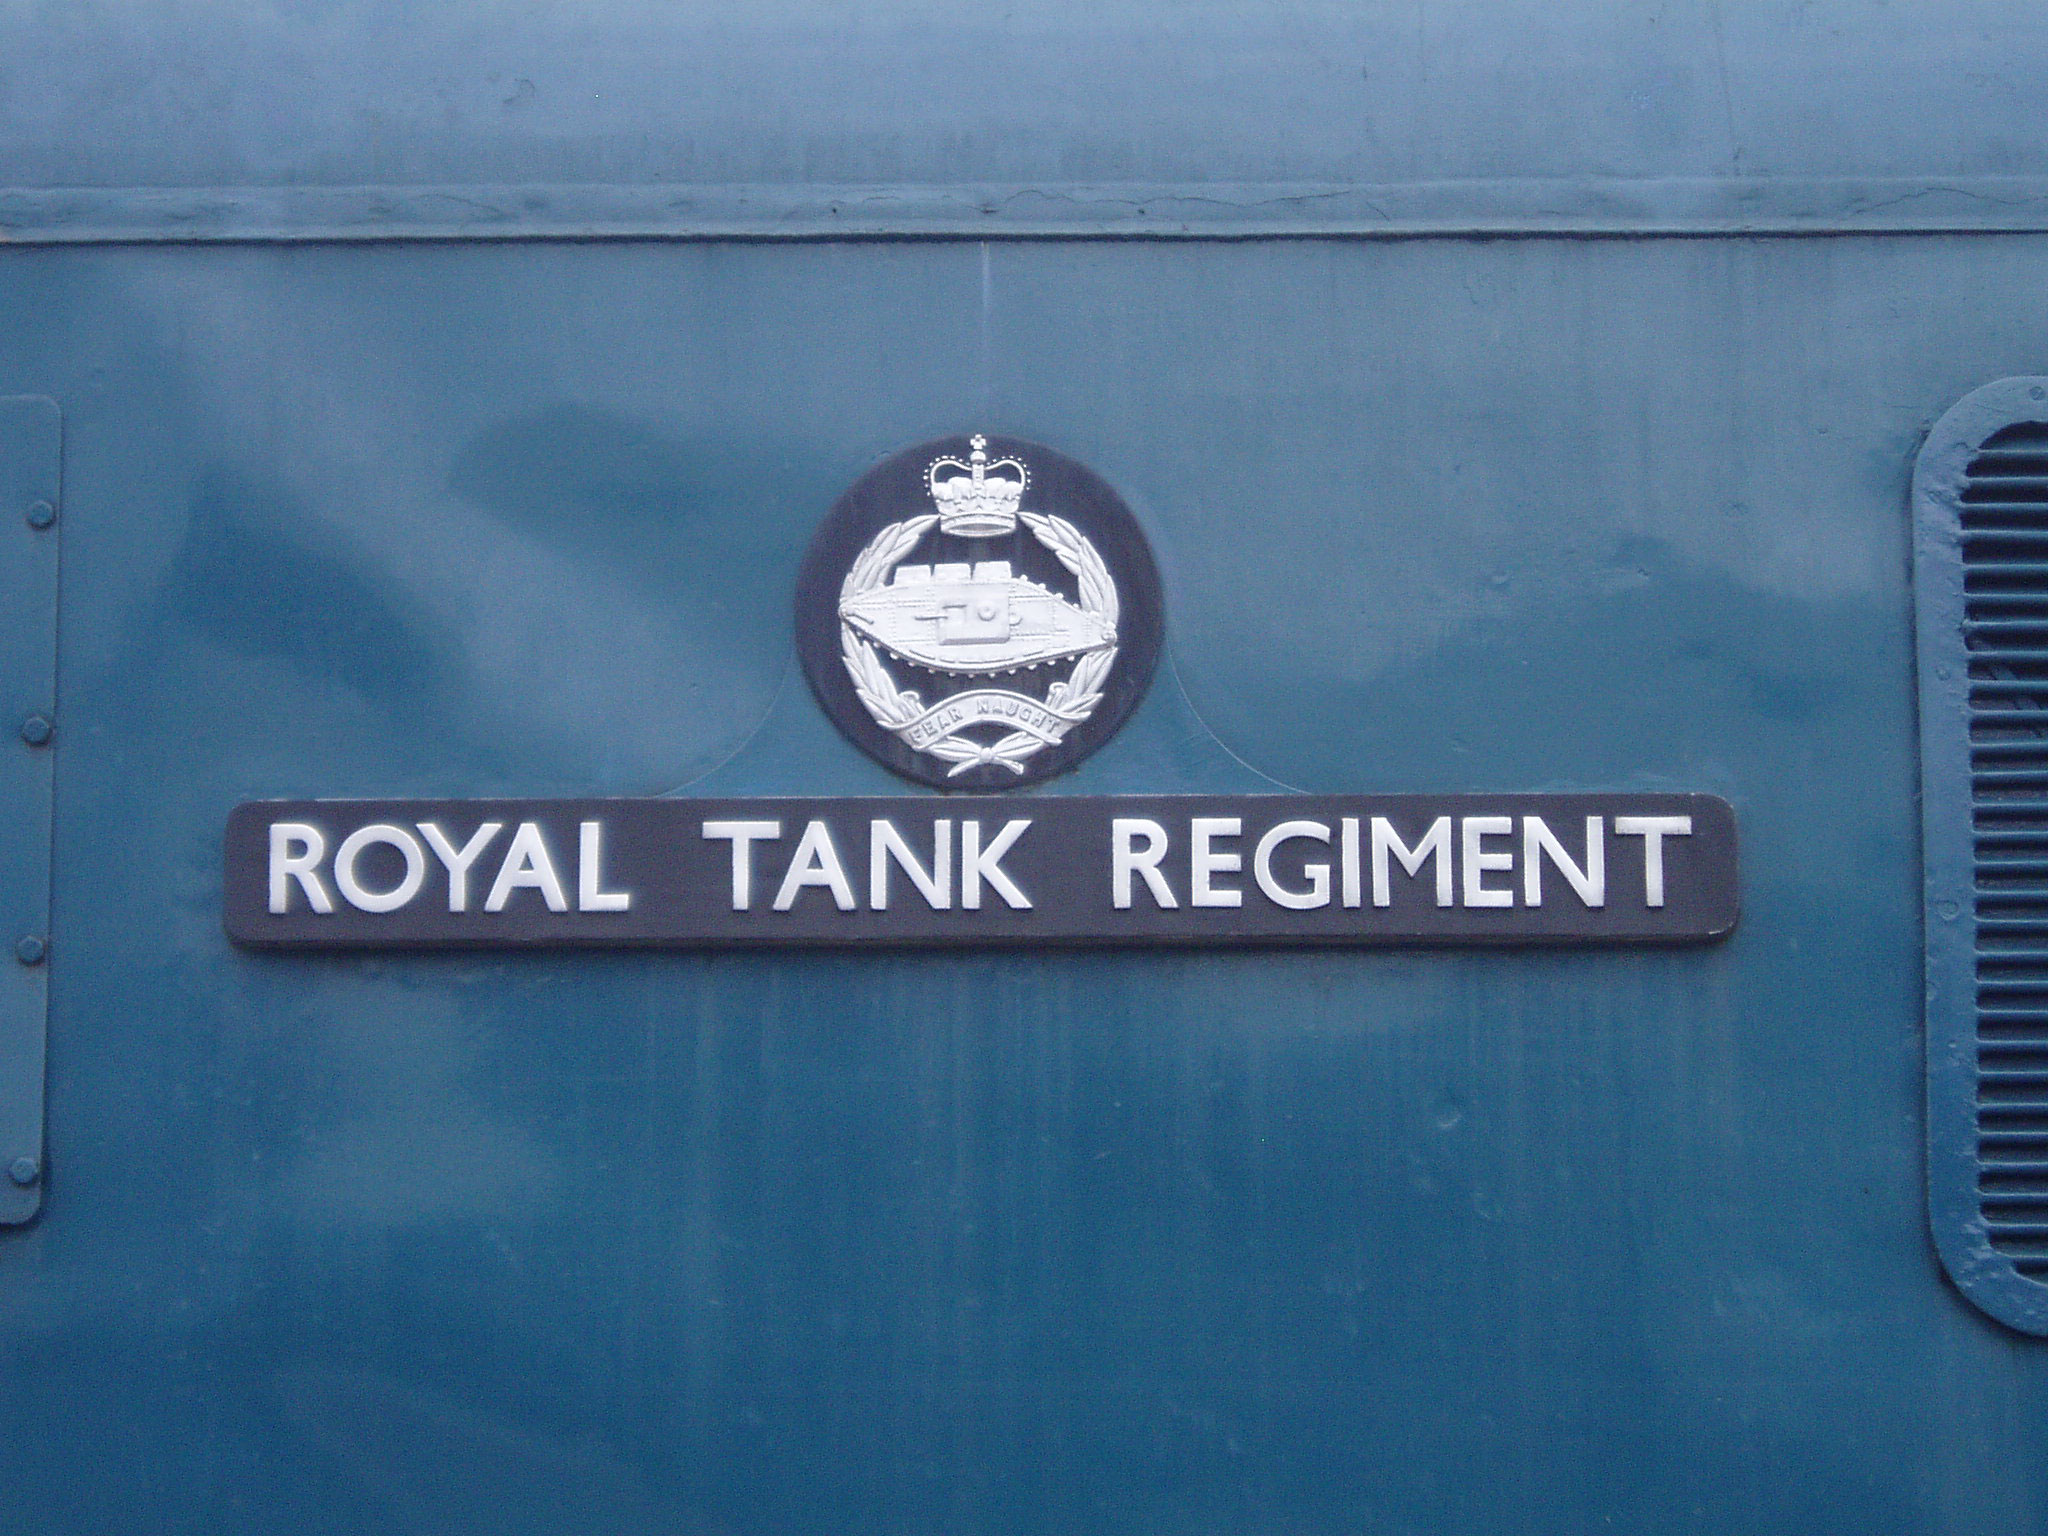 The Royal Tank Regiment showing off her name plate